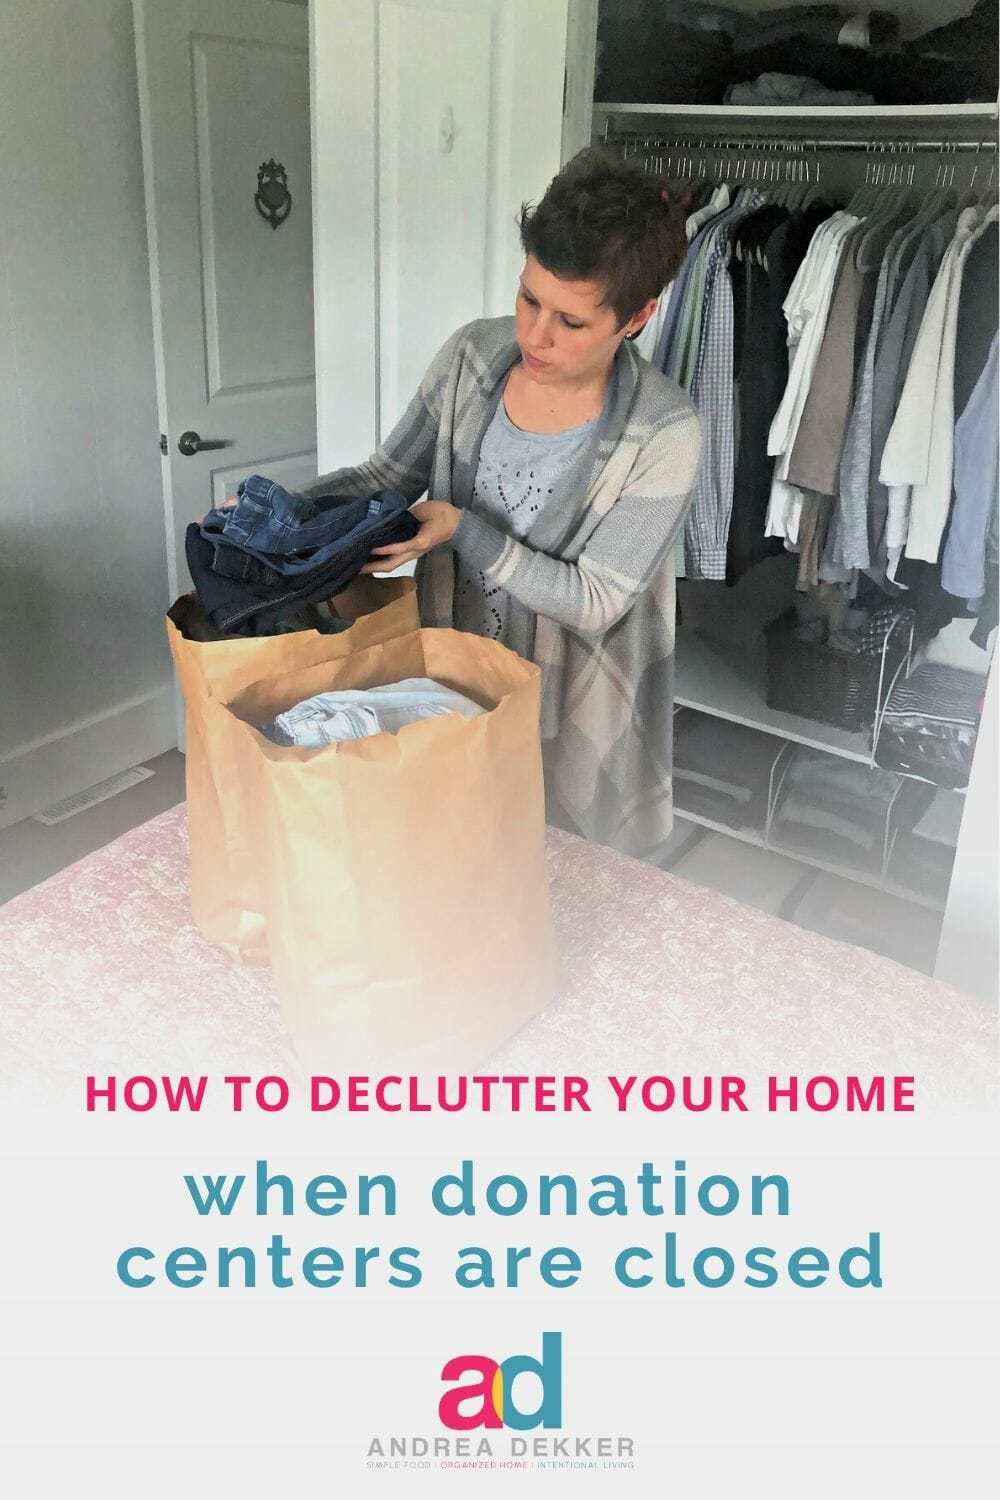 These 10 practical no-nonsense tips will help you declutter your home, even when donation centers are closed! via @andreadekker